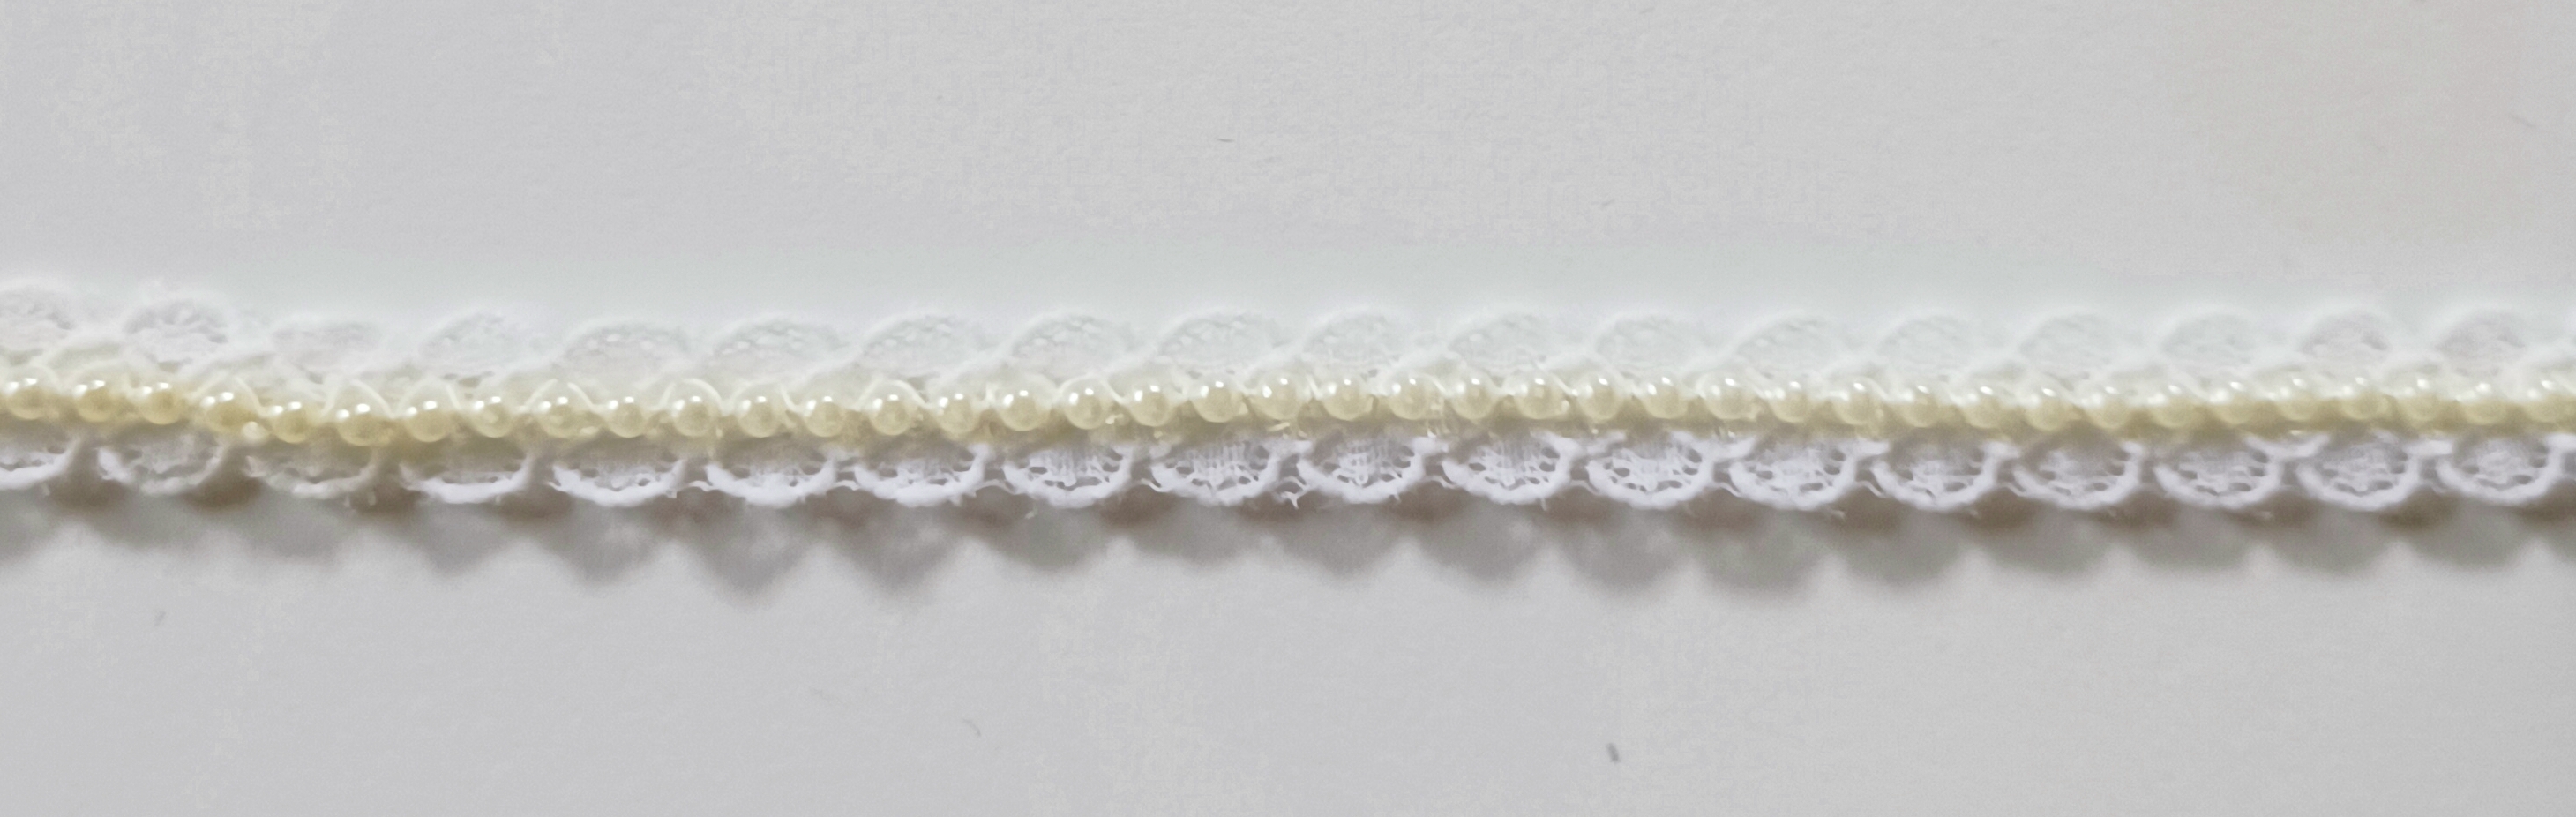 White Lace/Ivory Pearls 3/8" Trim